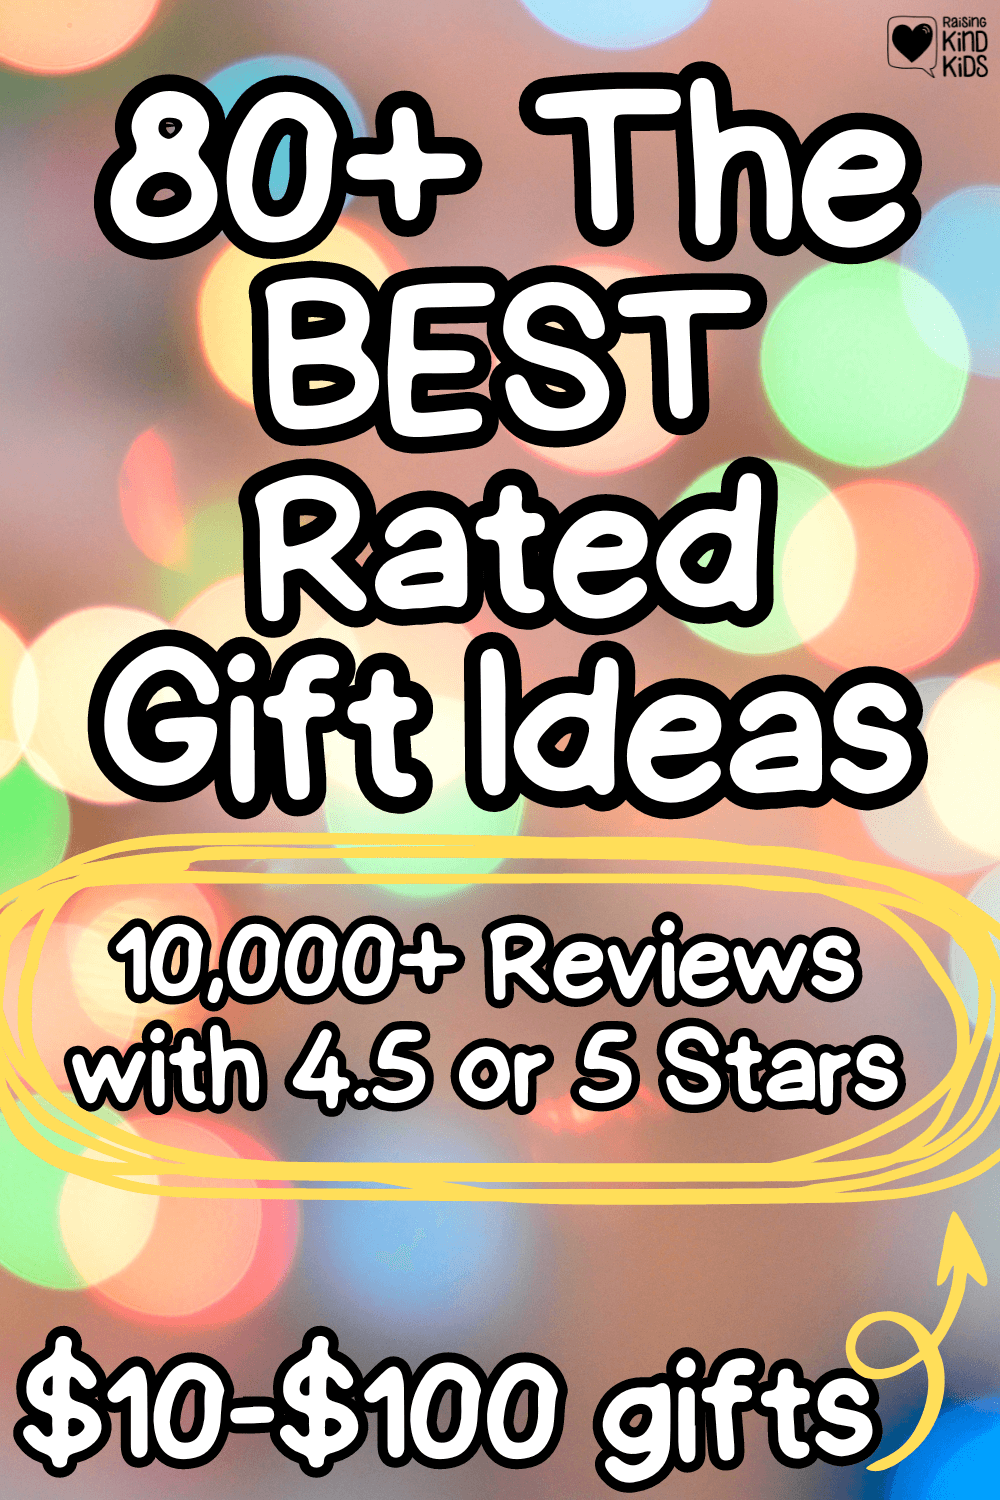 This list of best rated gifts on Amazon all have two things in common: they all have over 10,000 reviews AND 4.5 stars or higher.